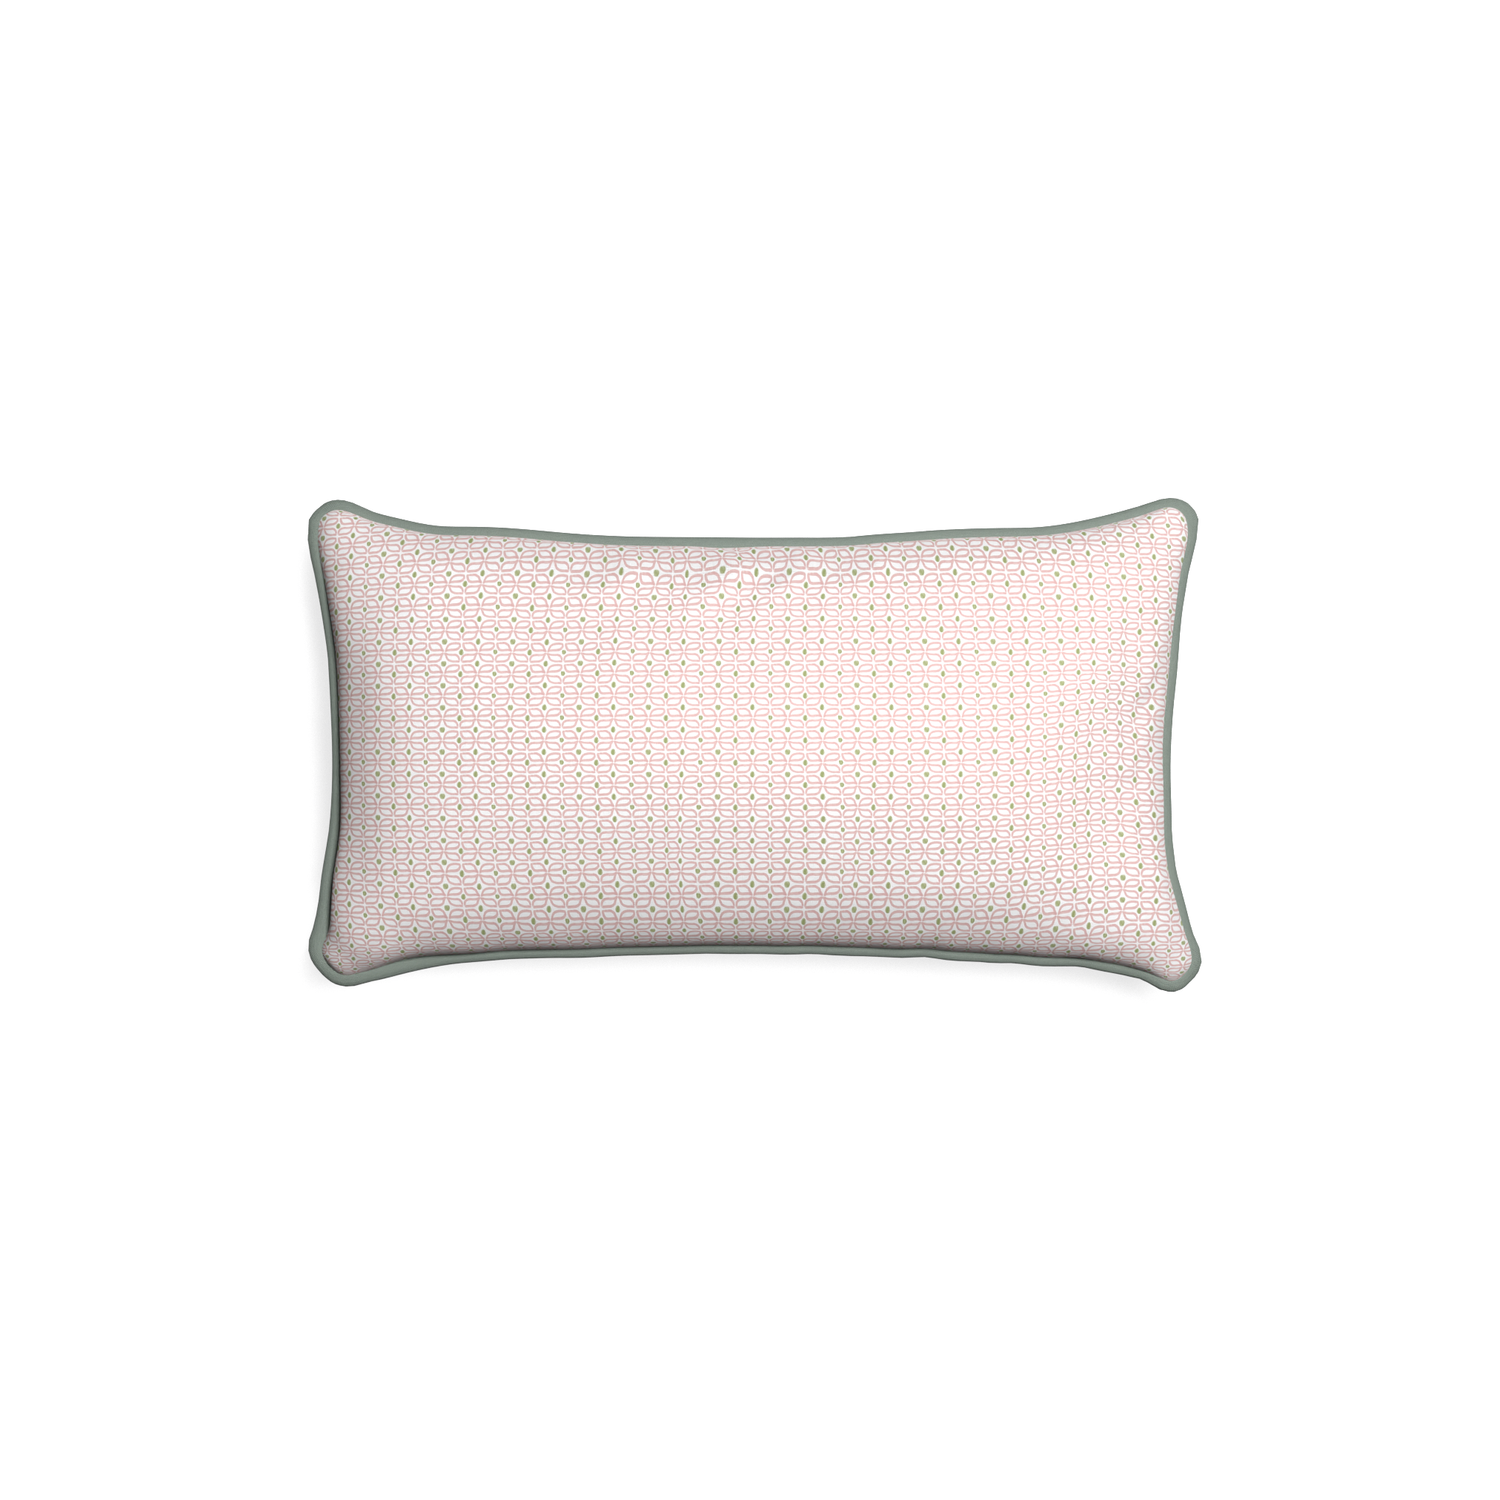 Petite-lumbar loomi pink custom pink geometricpillow with sage piping on white background